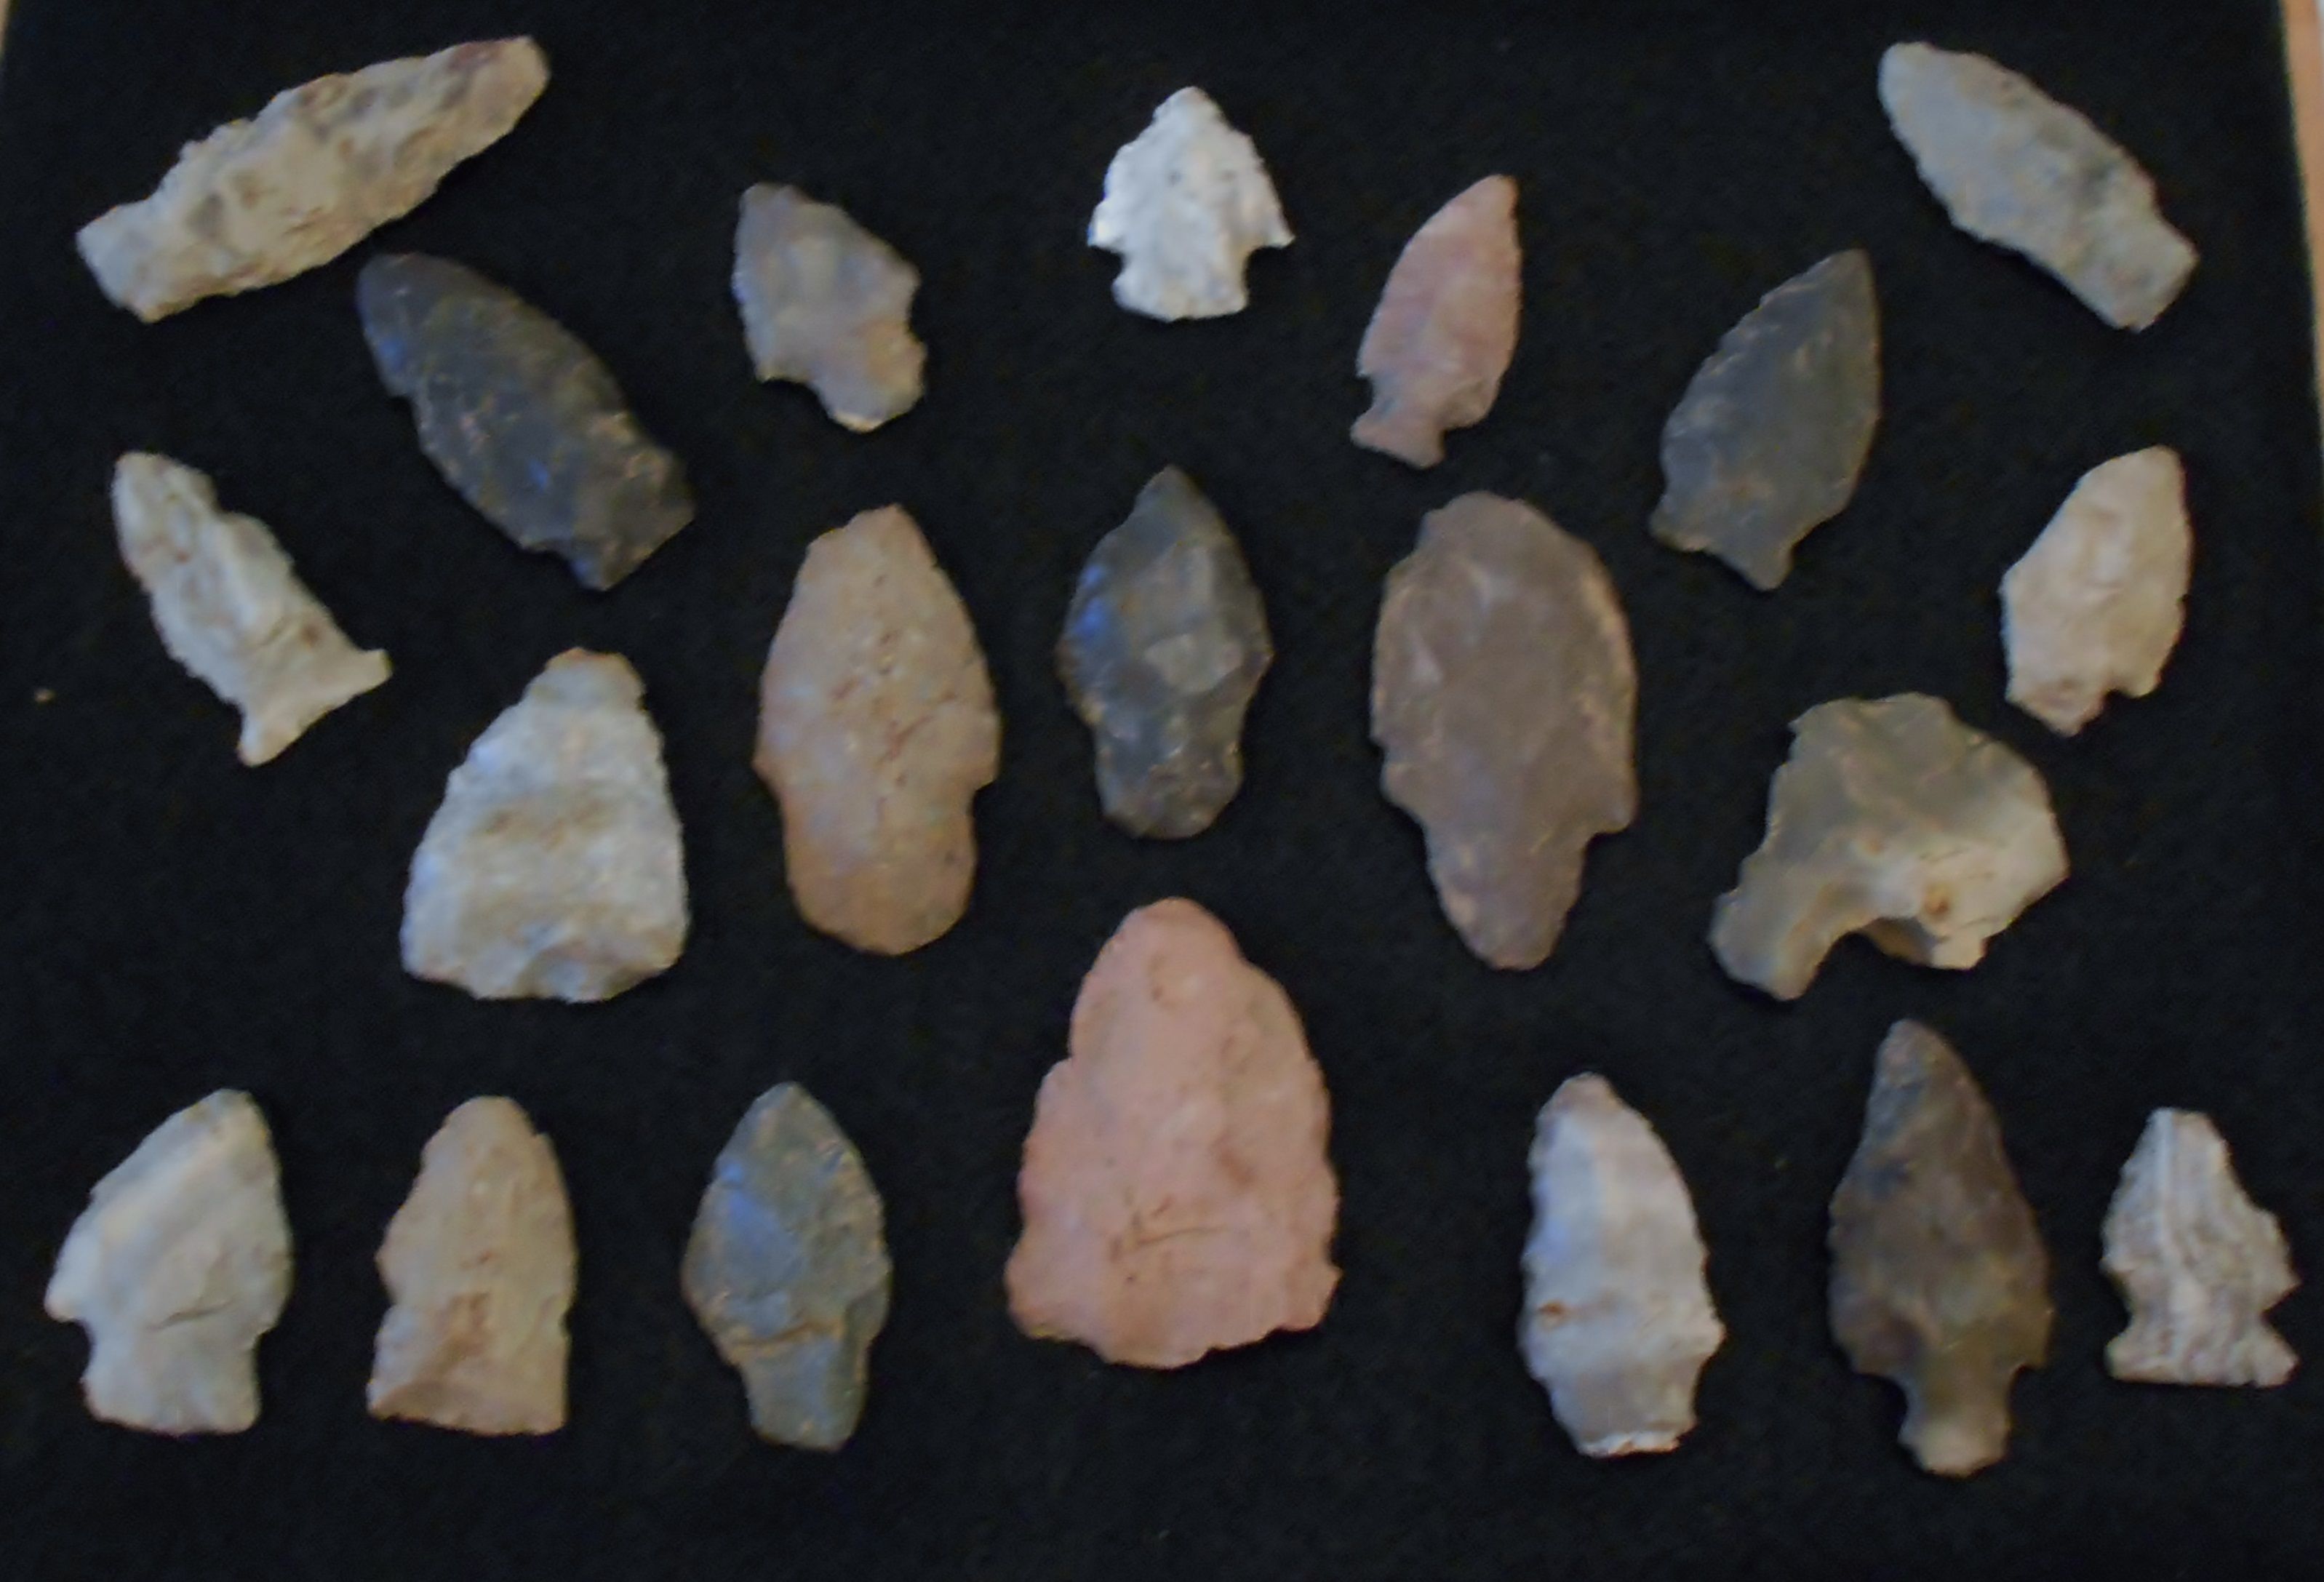 From 5-17 thru the end of June 2014, I picked up these Native American artifacts in 2 Tennessee fields on private land.